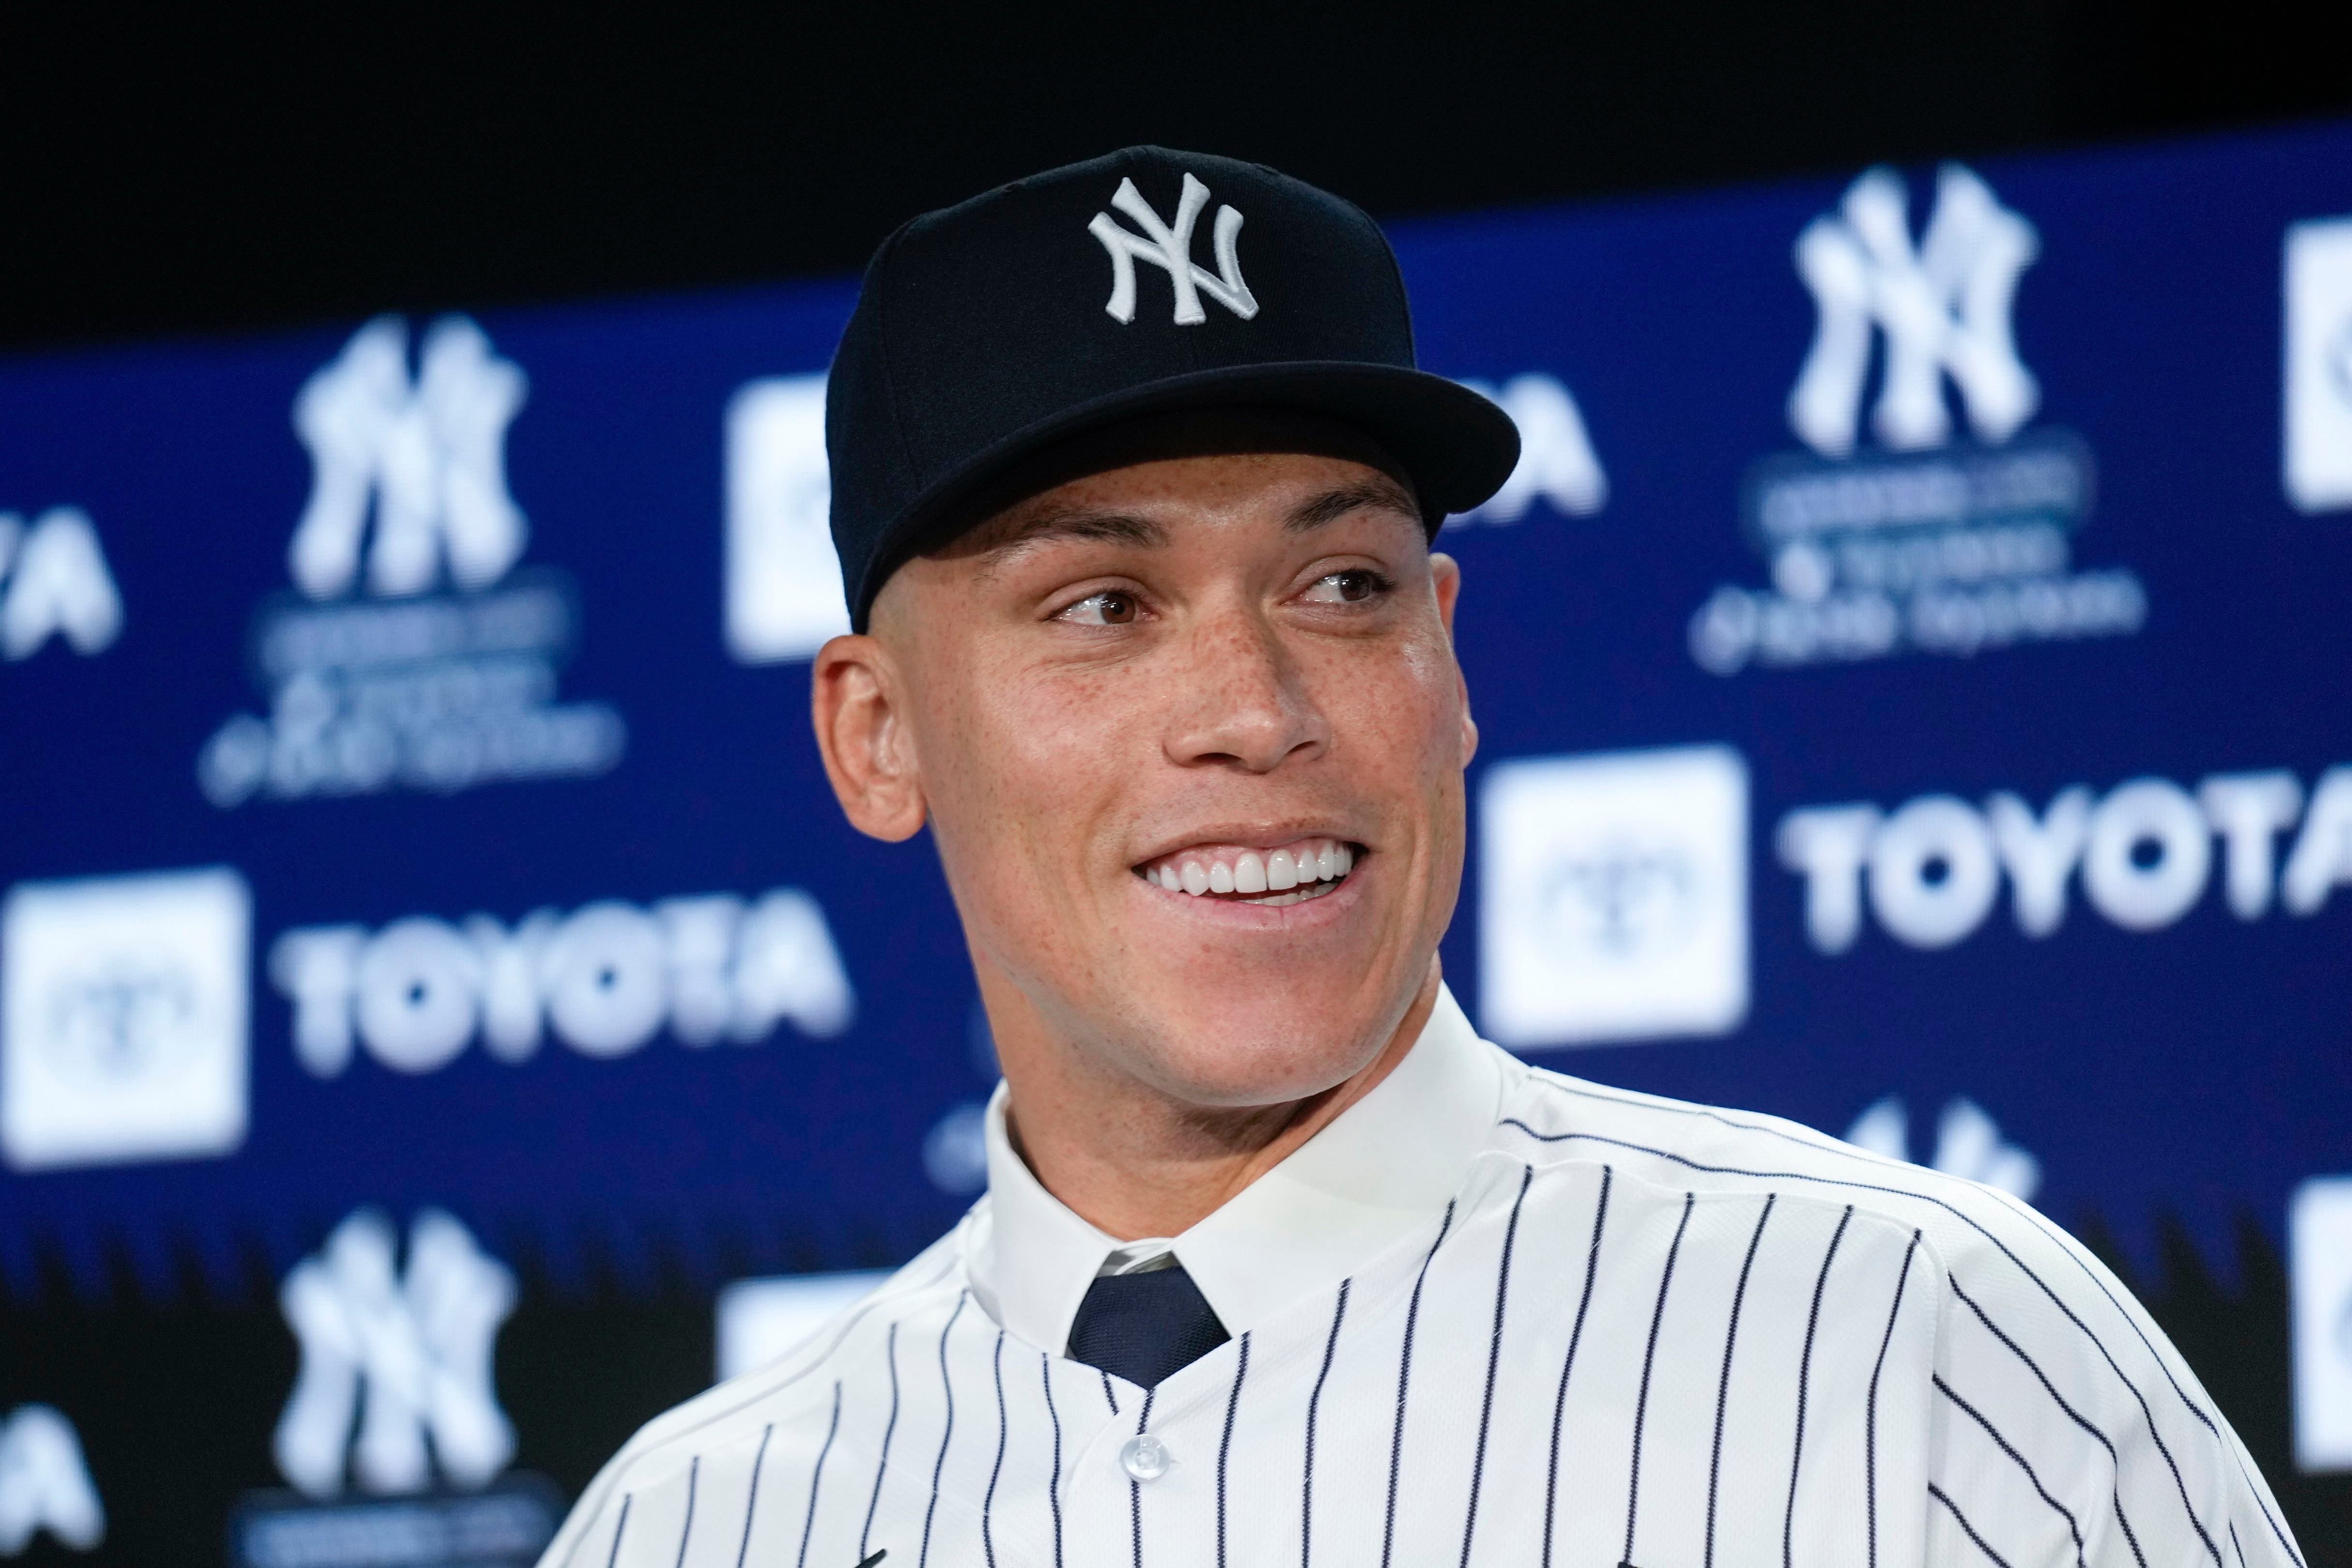 Aaron Judge's 62nd homer celebrated with new commemorative shirts